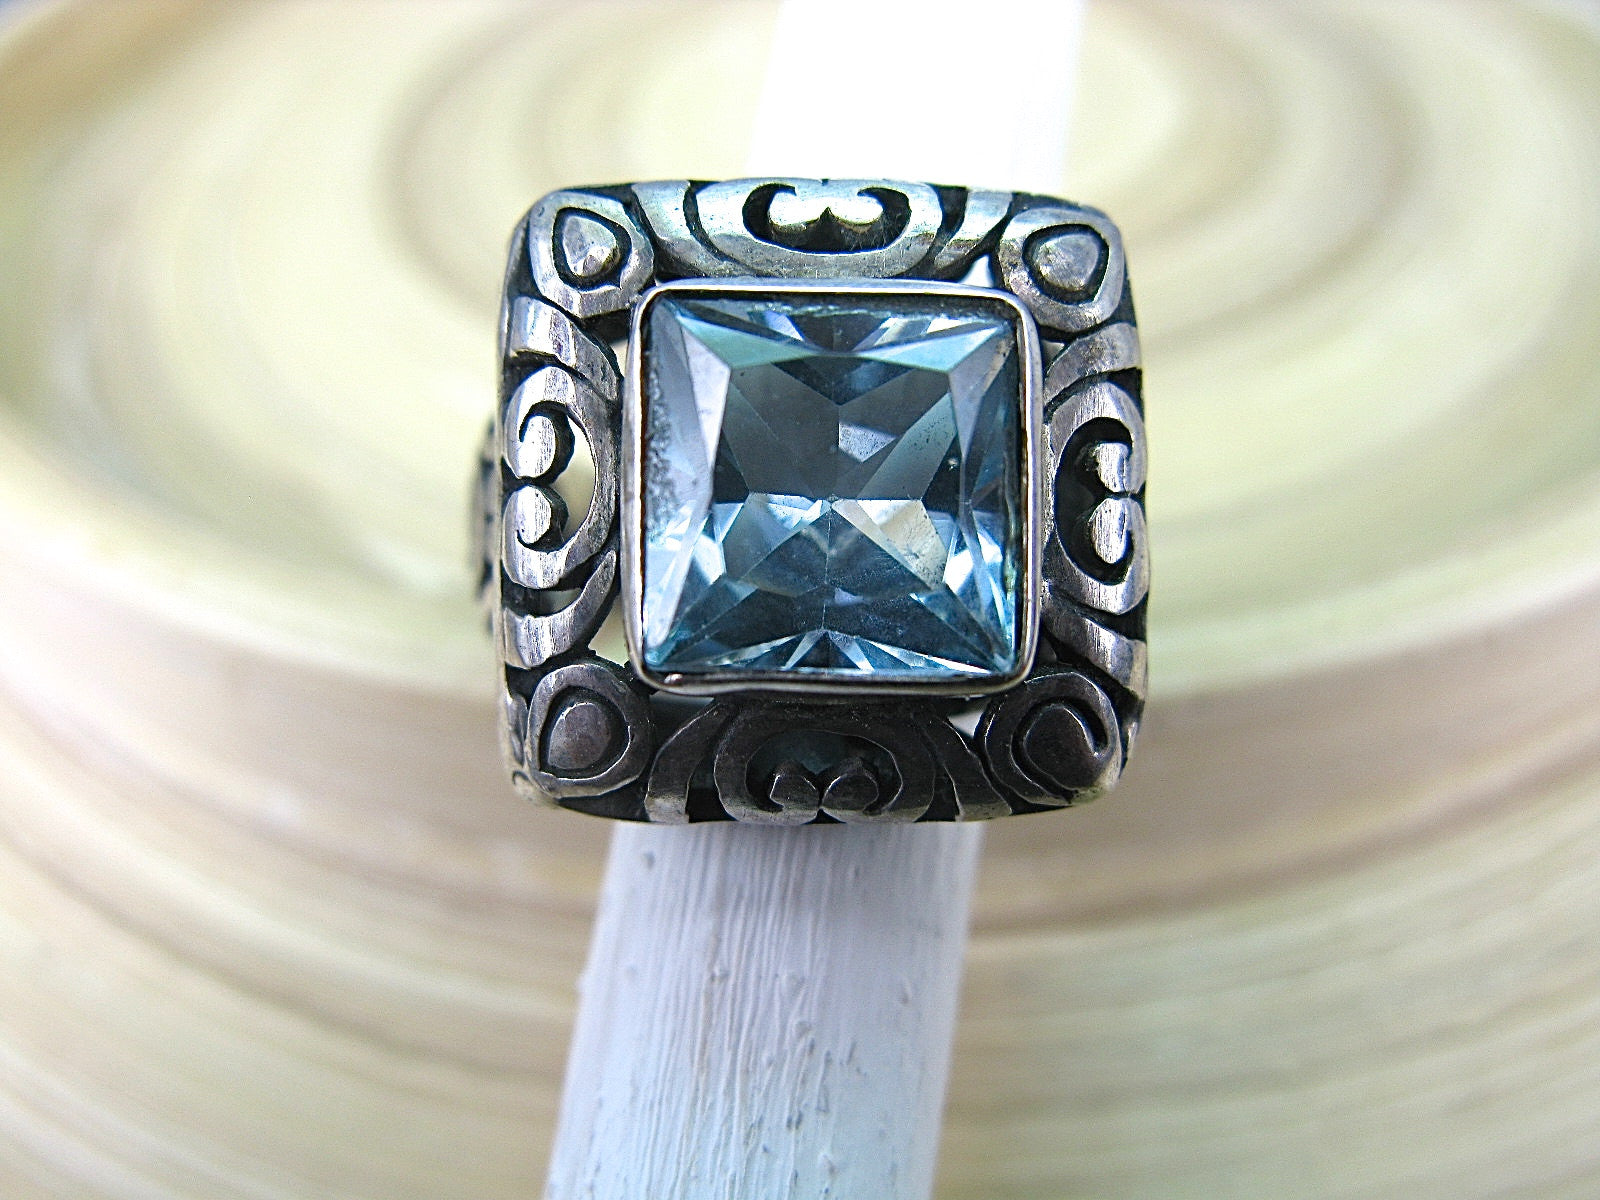 Balinese Blue Topaz Large Filigree Square 925 Sterling Silver Ring Ring - Faith Owl